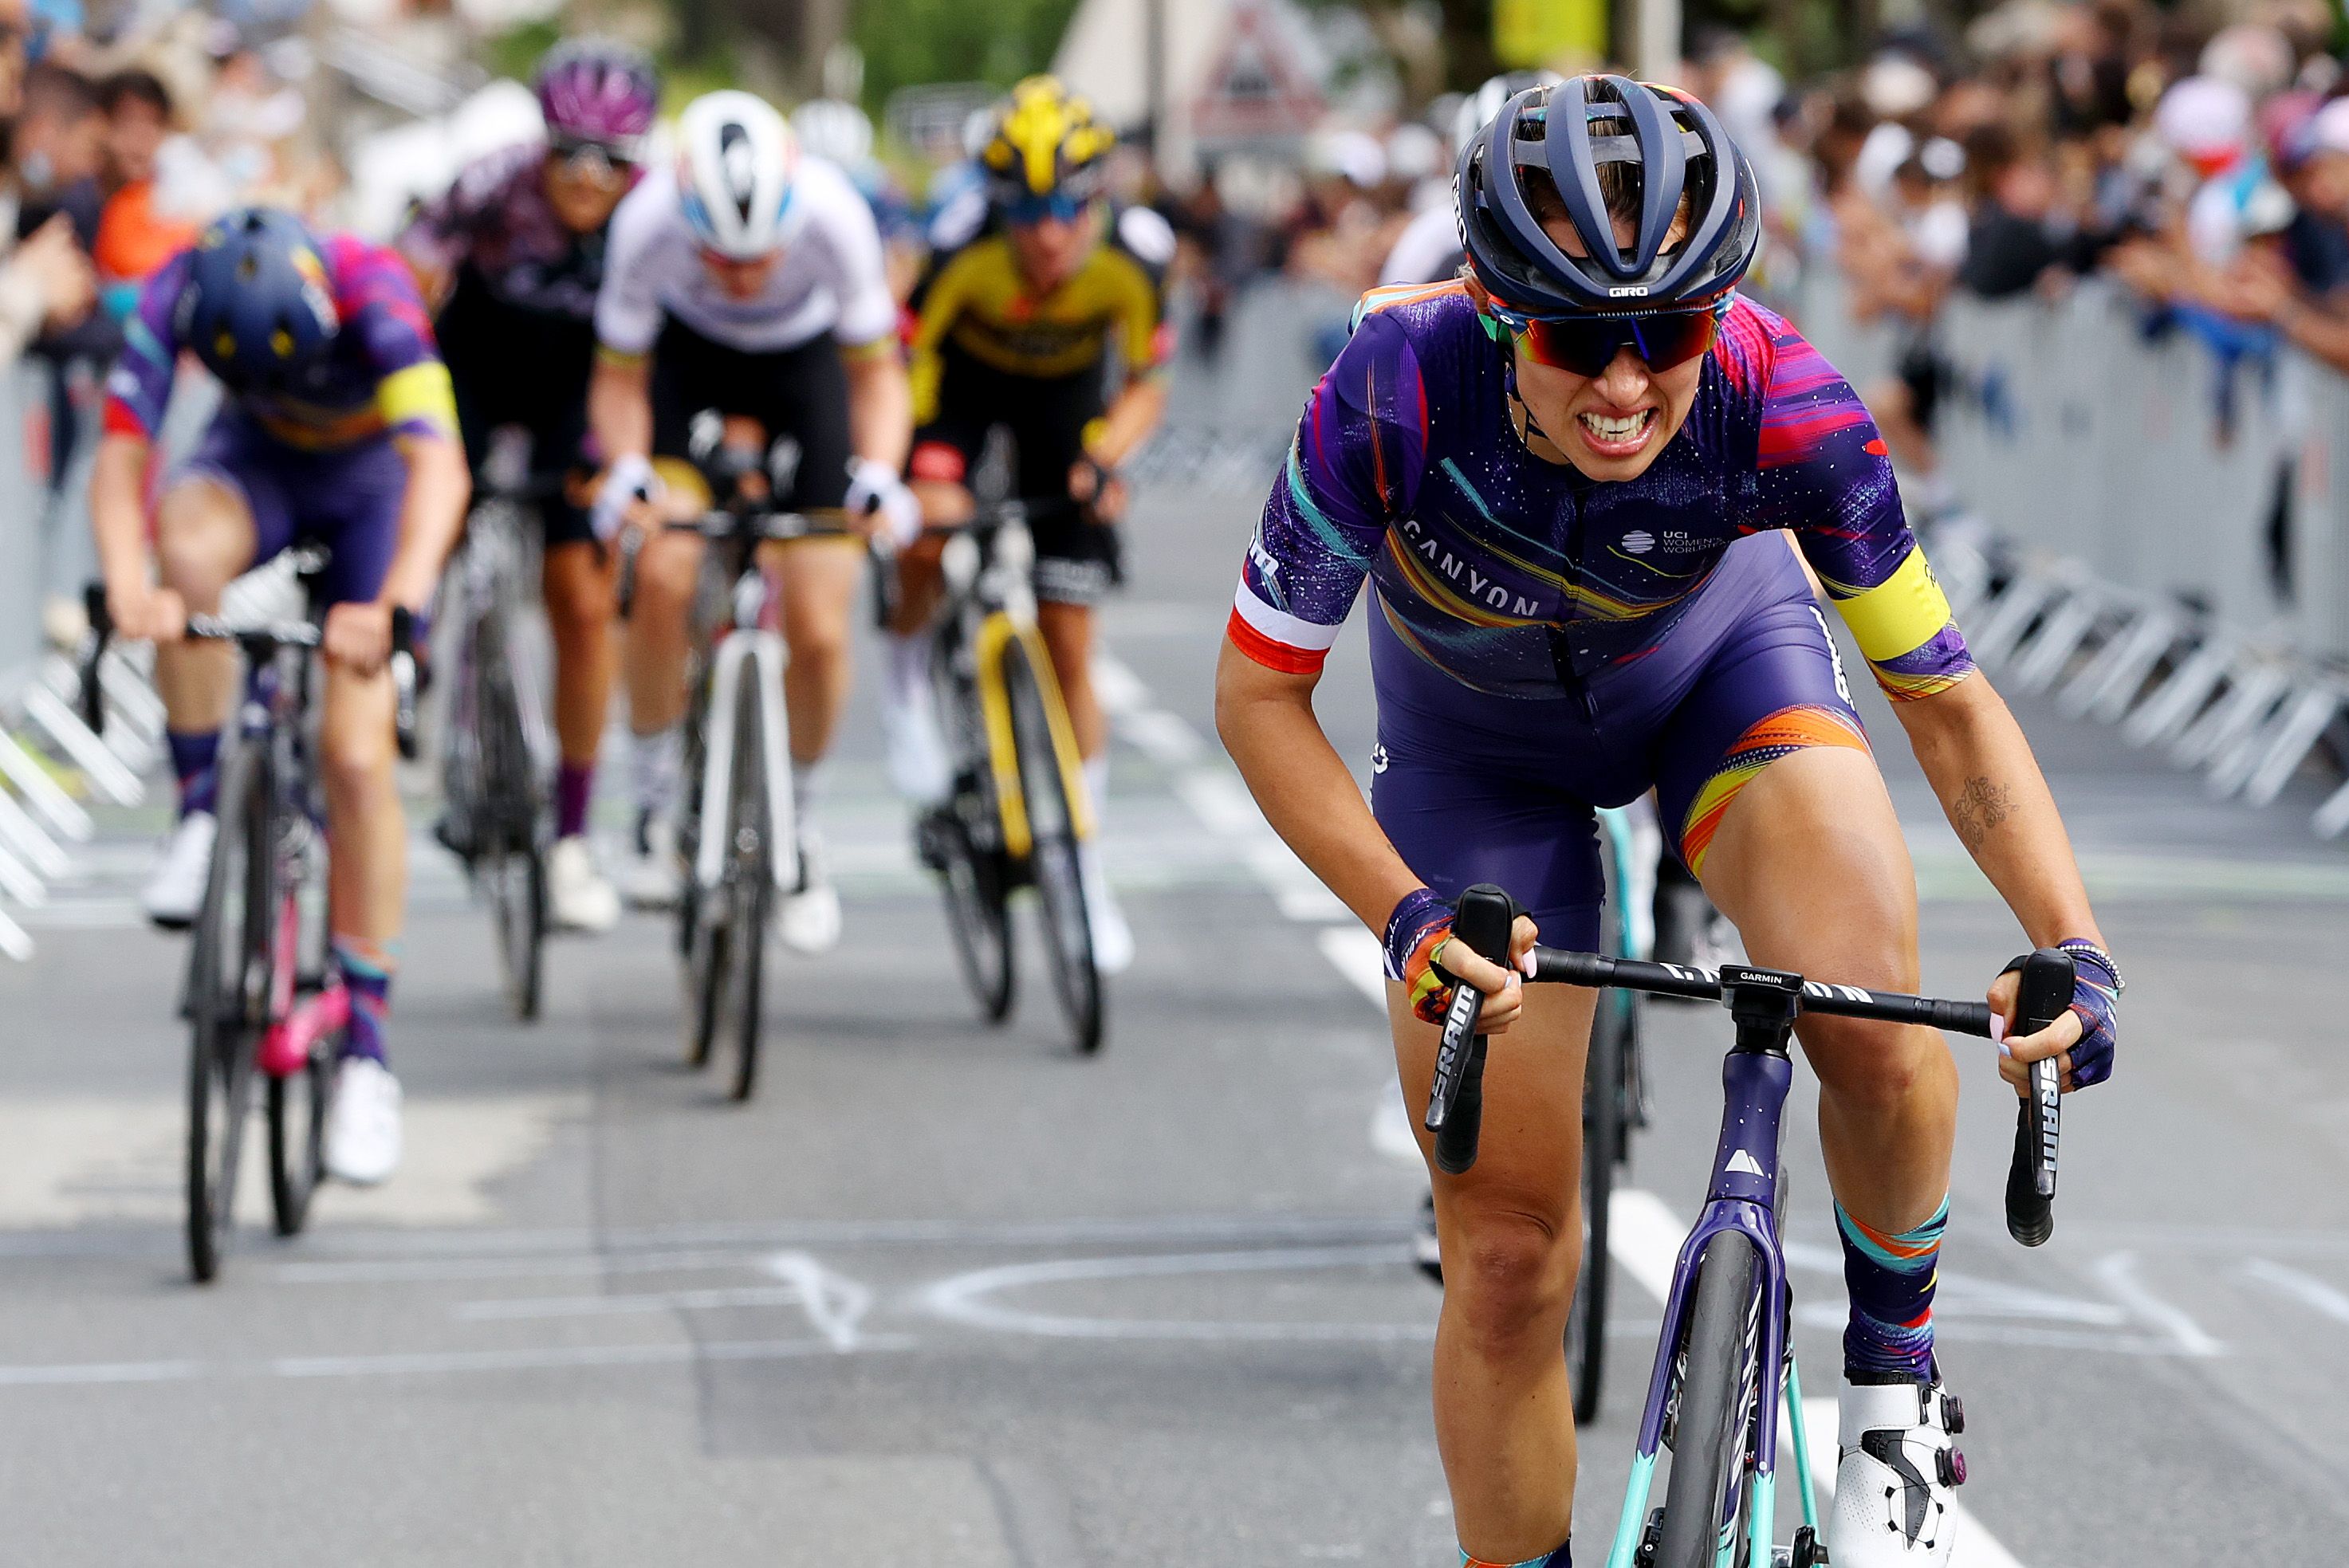 How to Watch the TdF Femmes 2022 - Live Stream